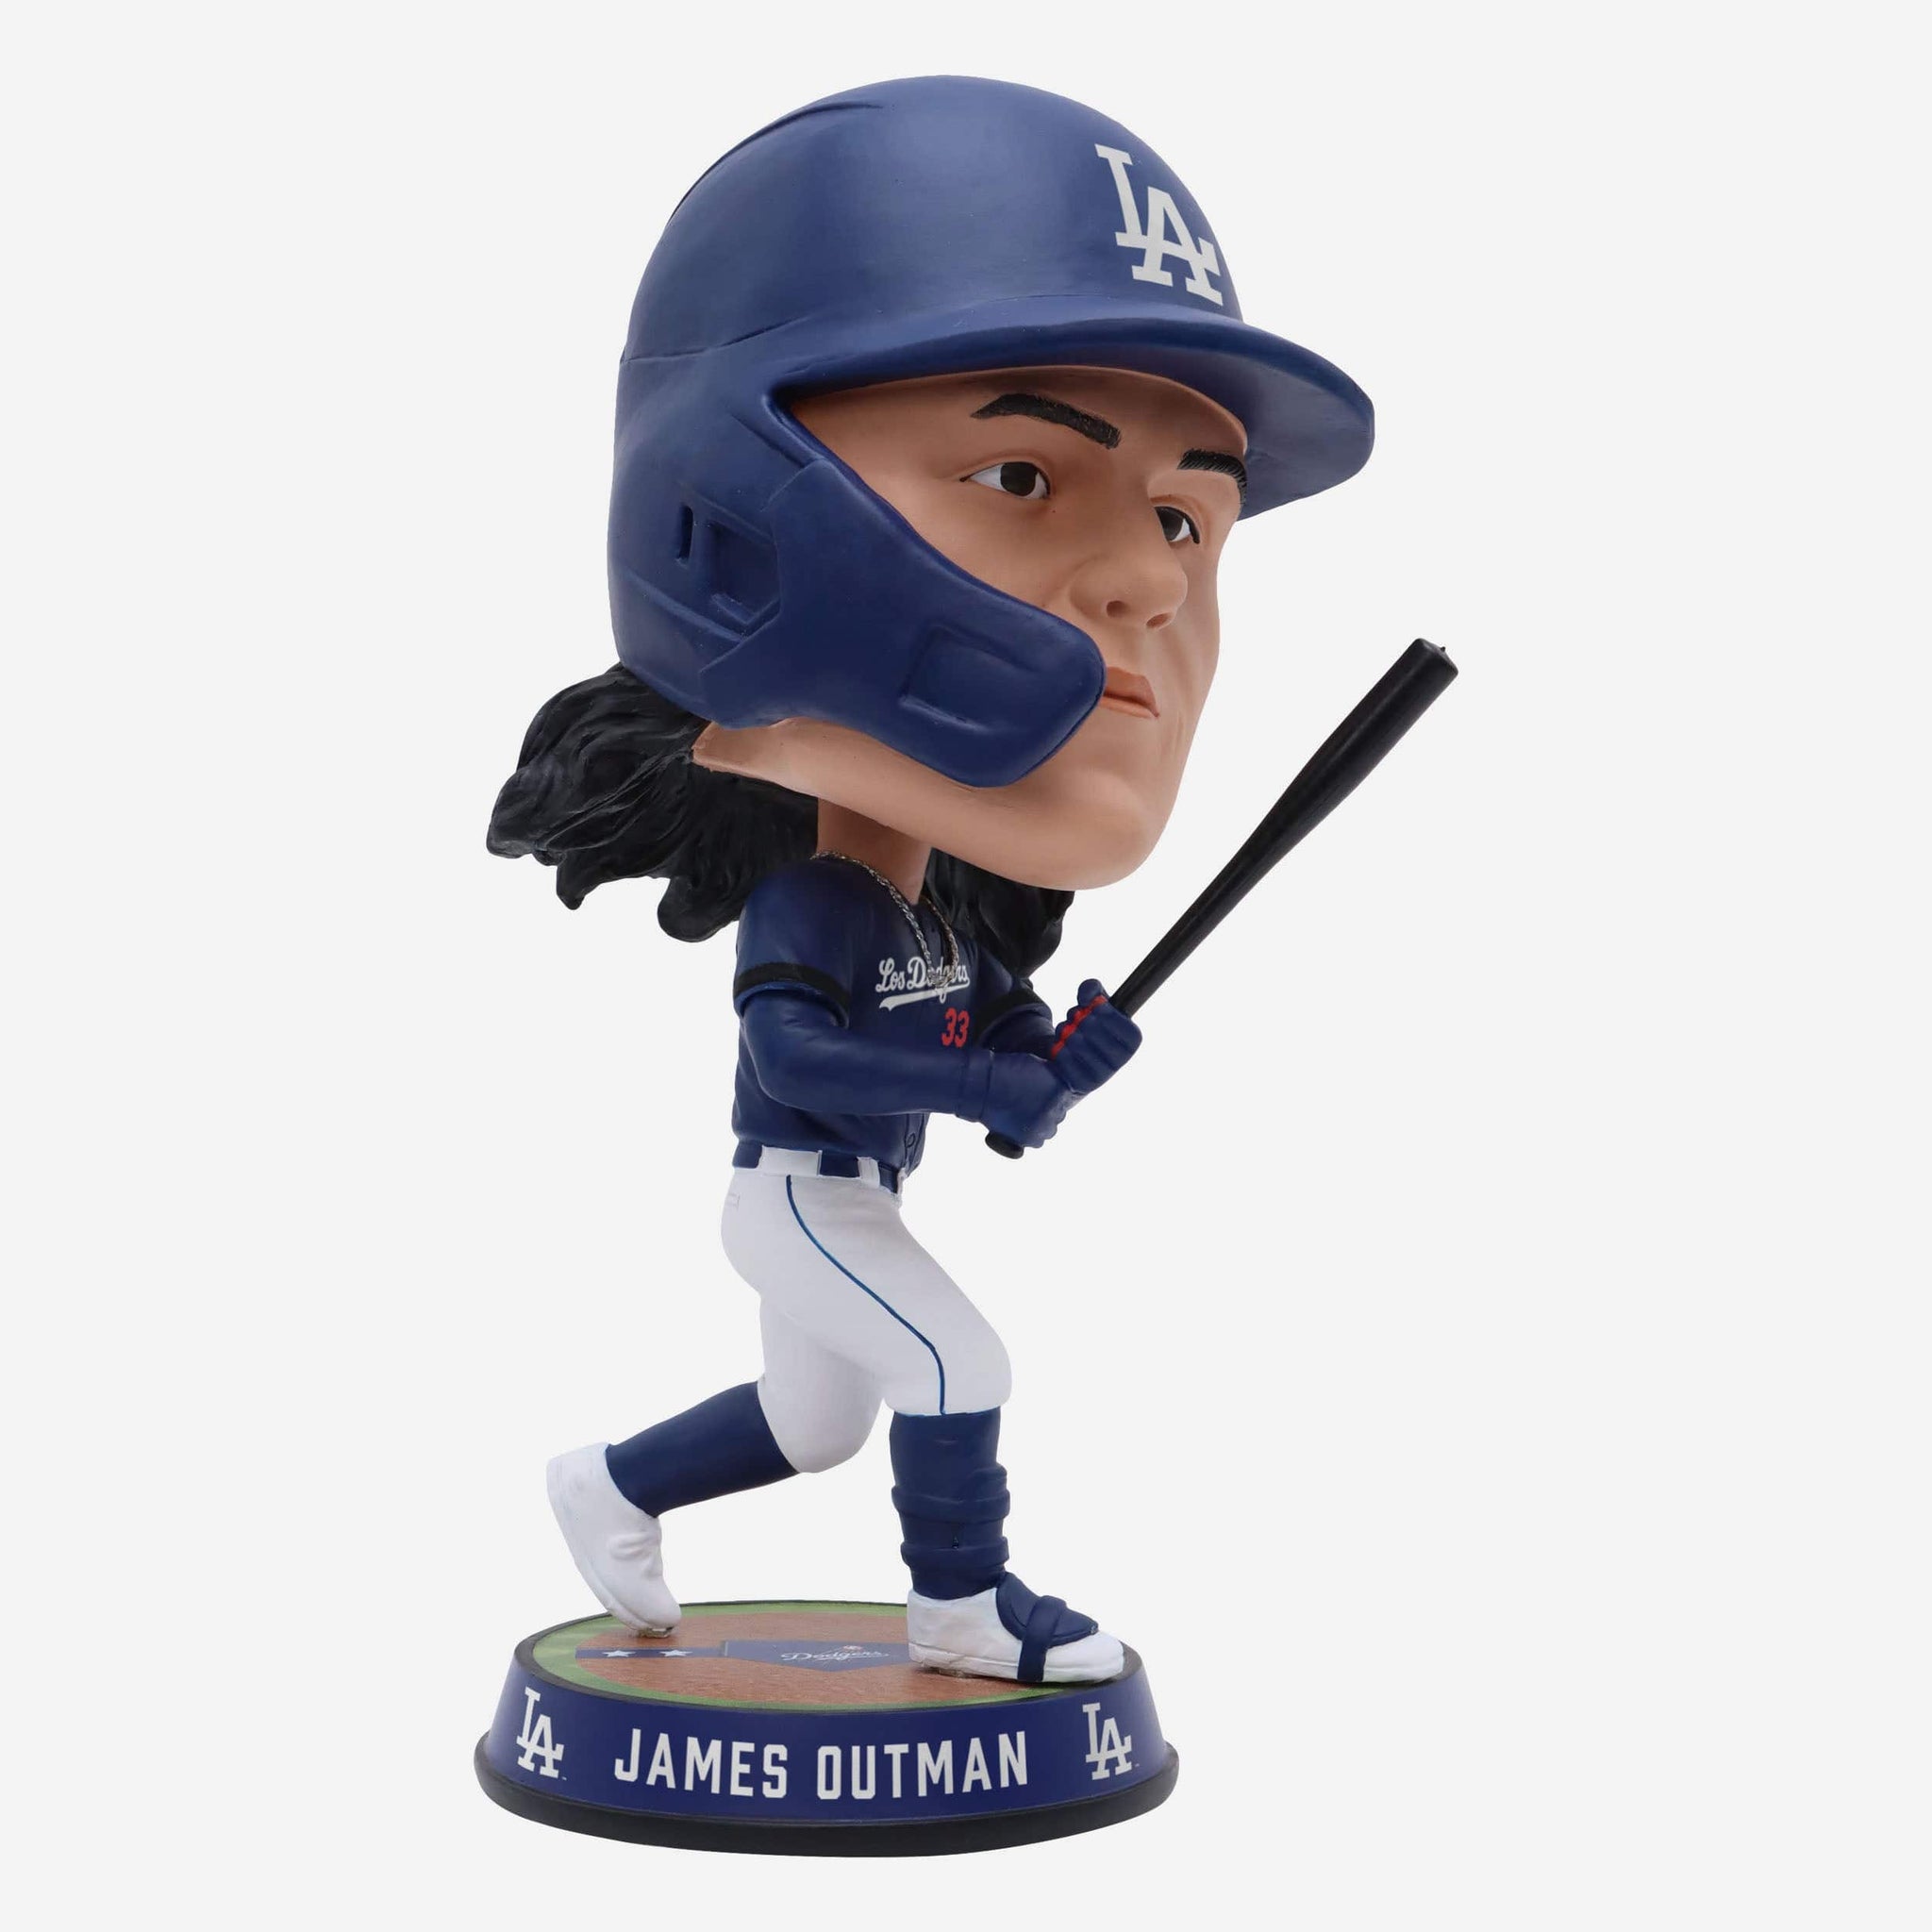 James Outman player card : r/Dodgers